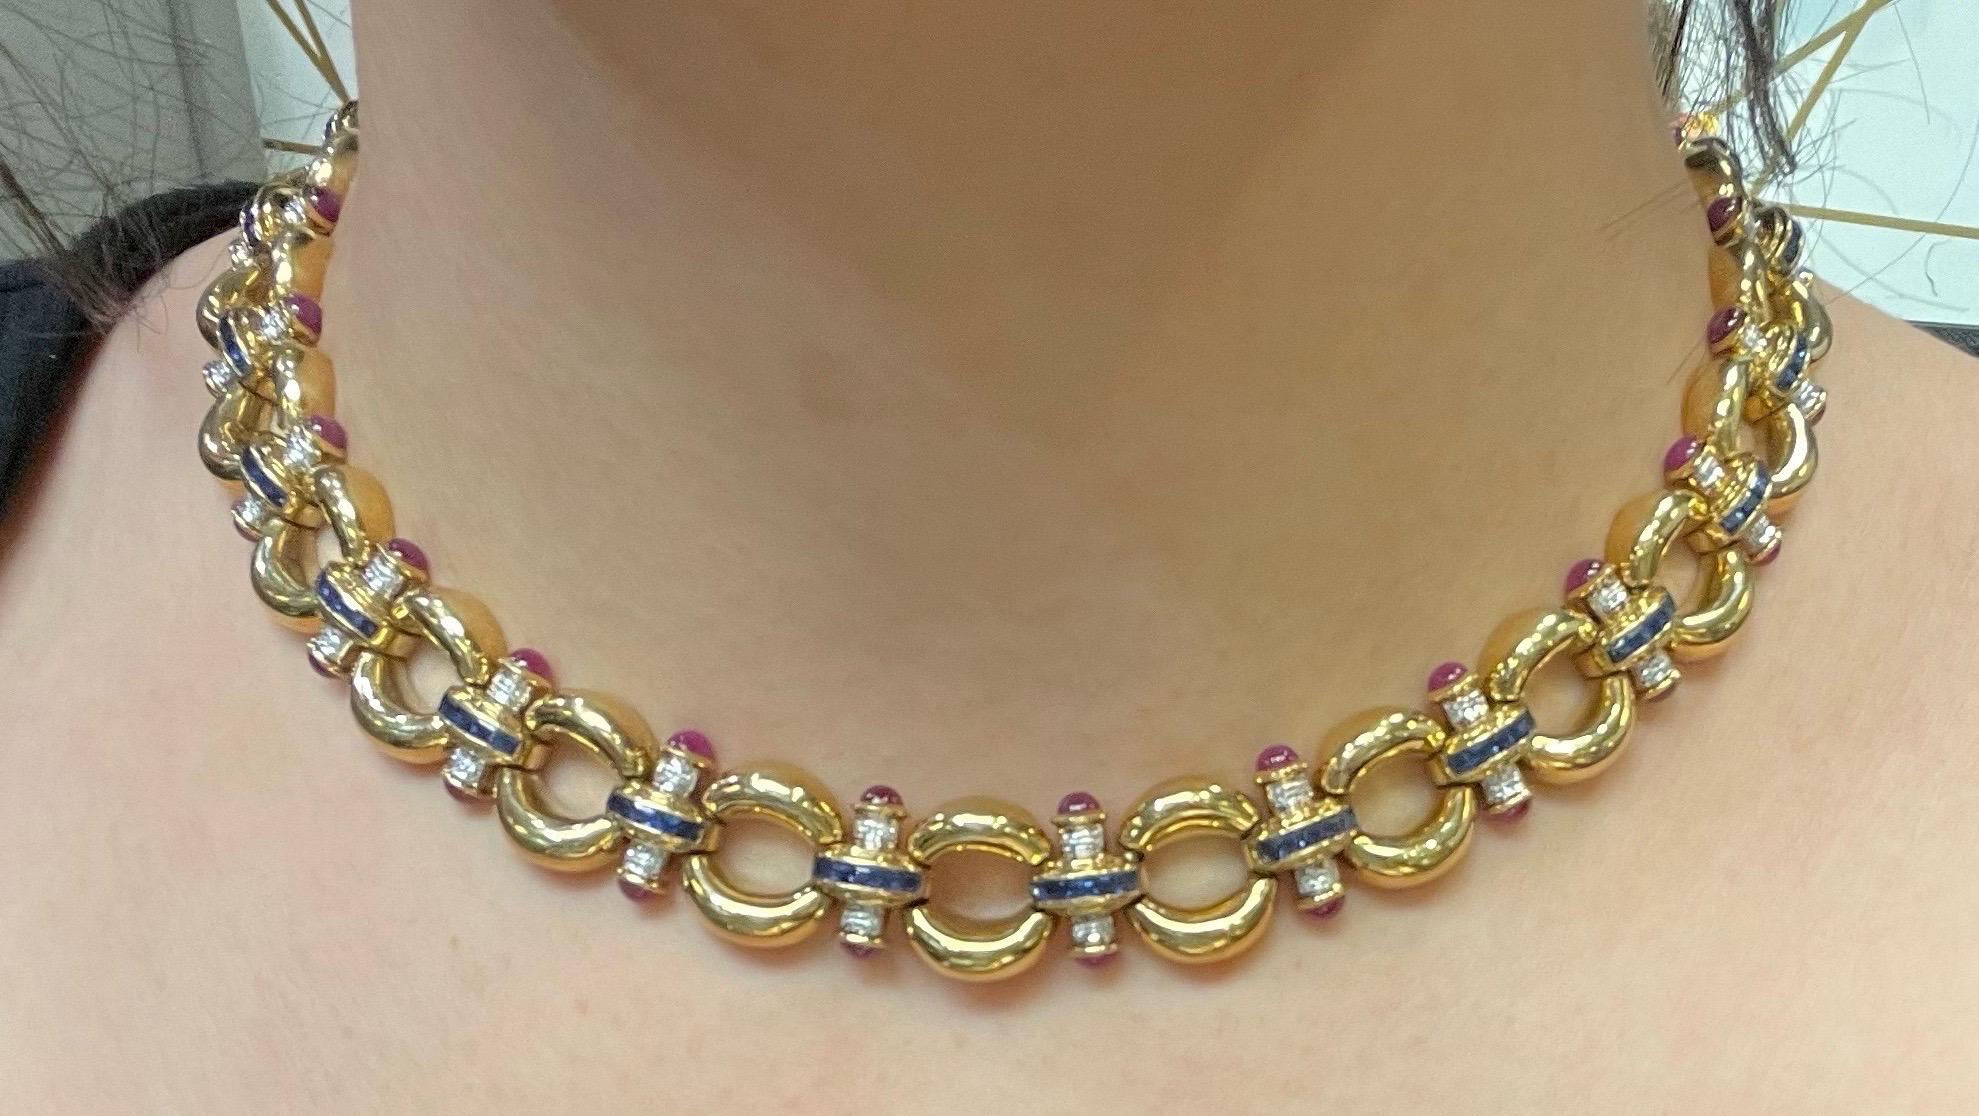 Ruby, Sapphire, and Diamond Necklace

A link necklace with cabochon rubies, sapphires, and round-cut diamonds. 

Approximate ruby weight: 19.20 carats
Approximate diamond weight: .50 carats
Approximate sapphire weight: 6.30 carats
Gross gram weight: